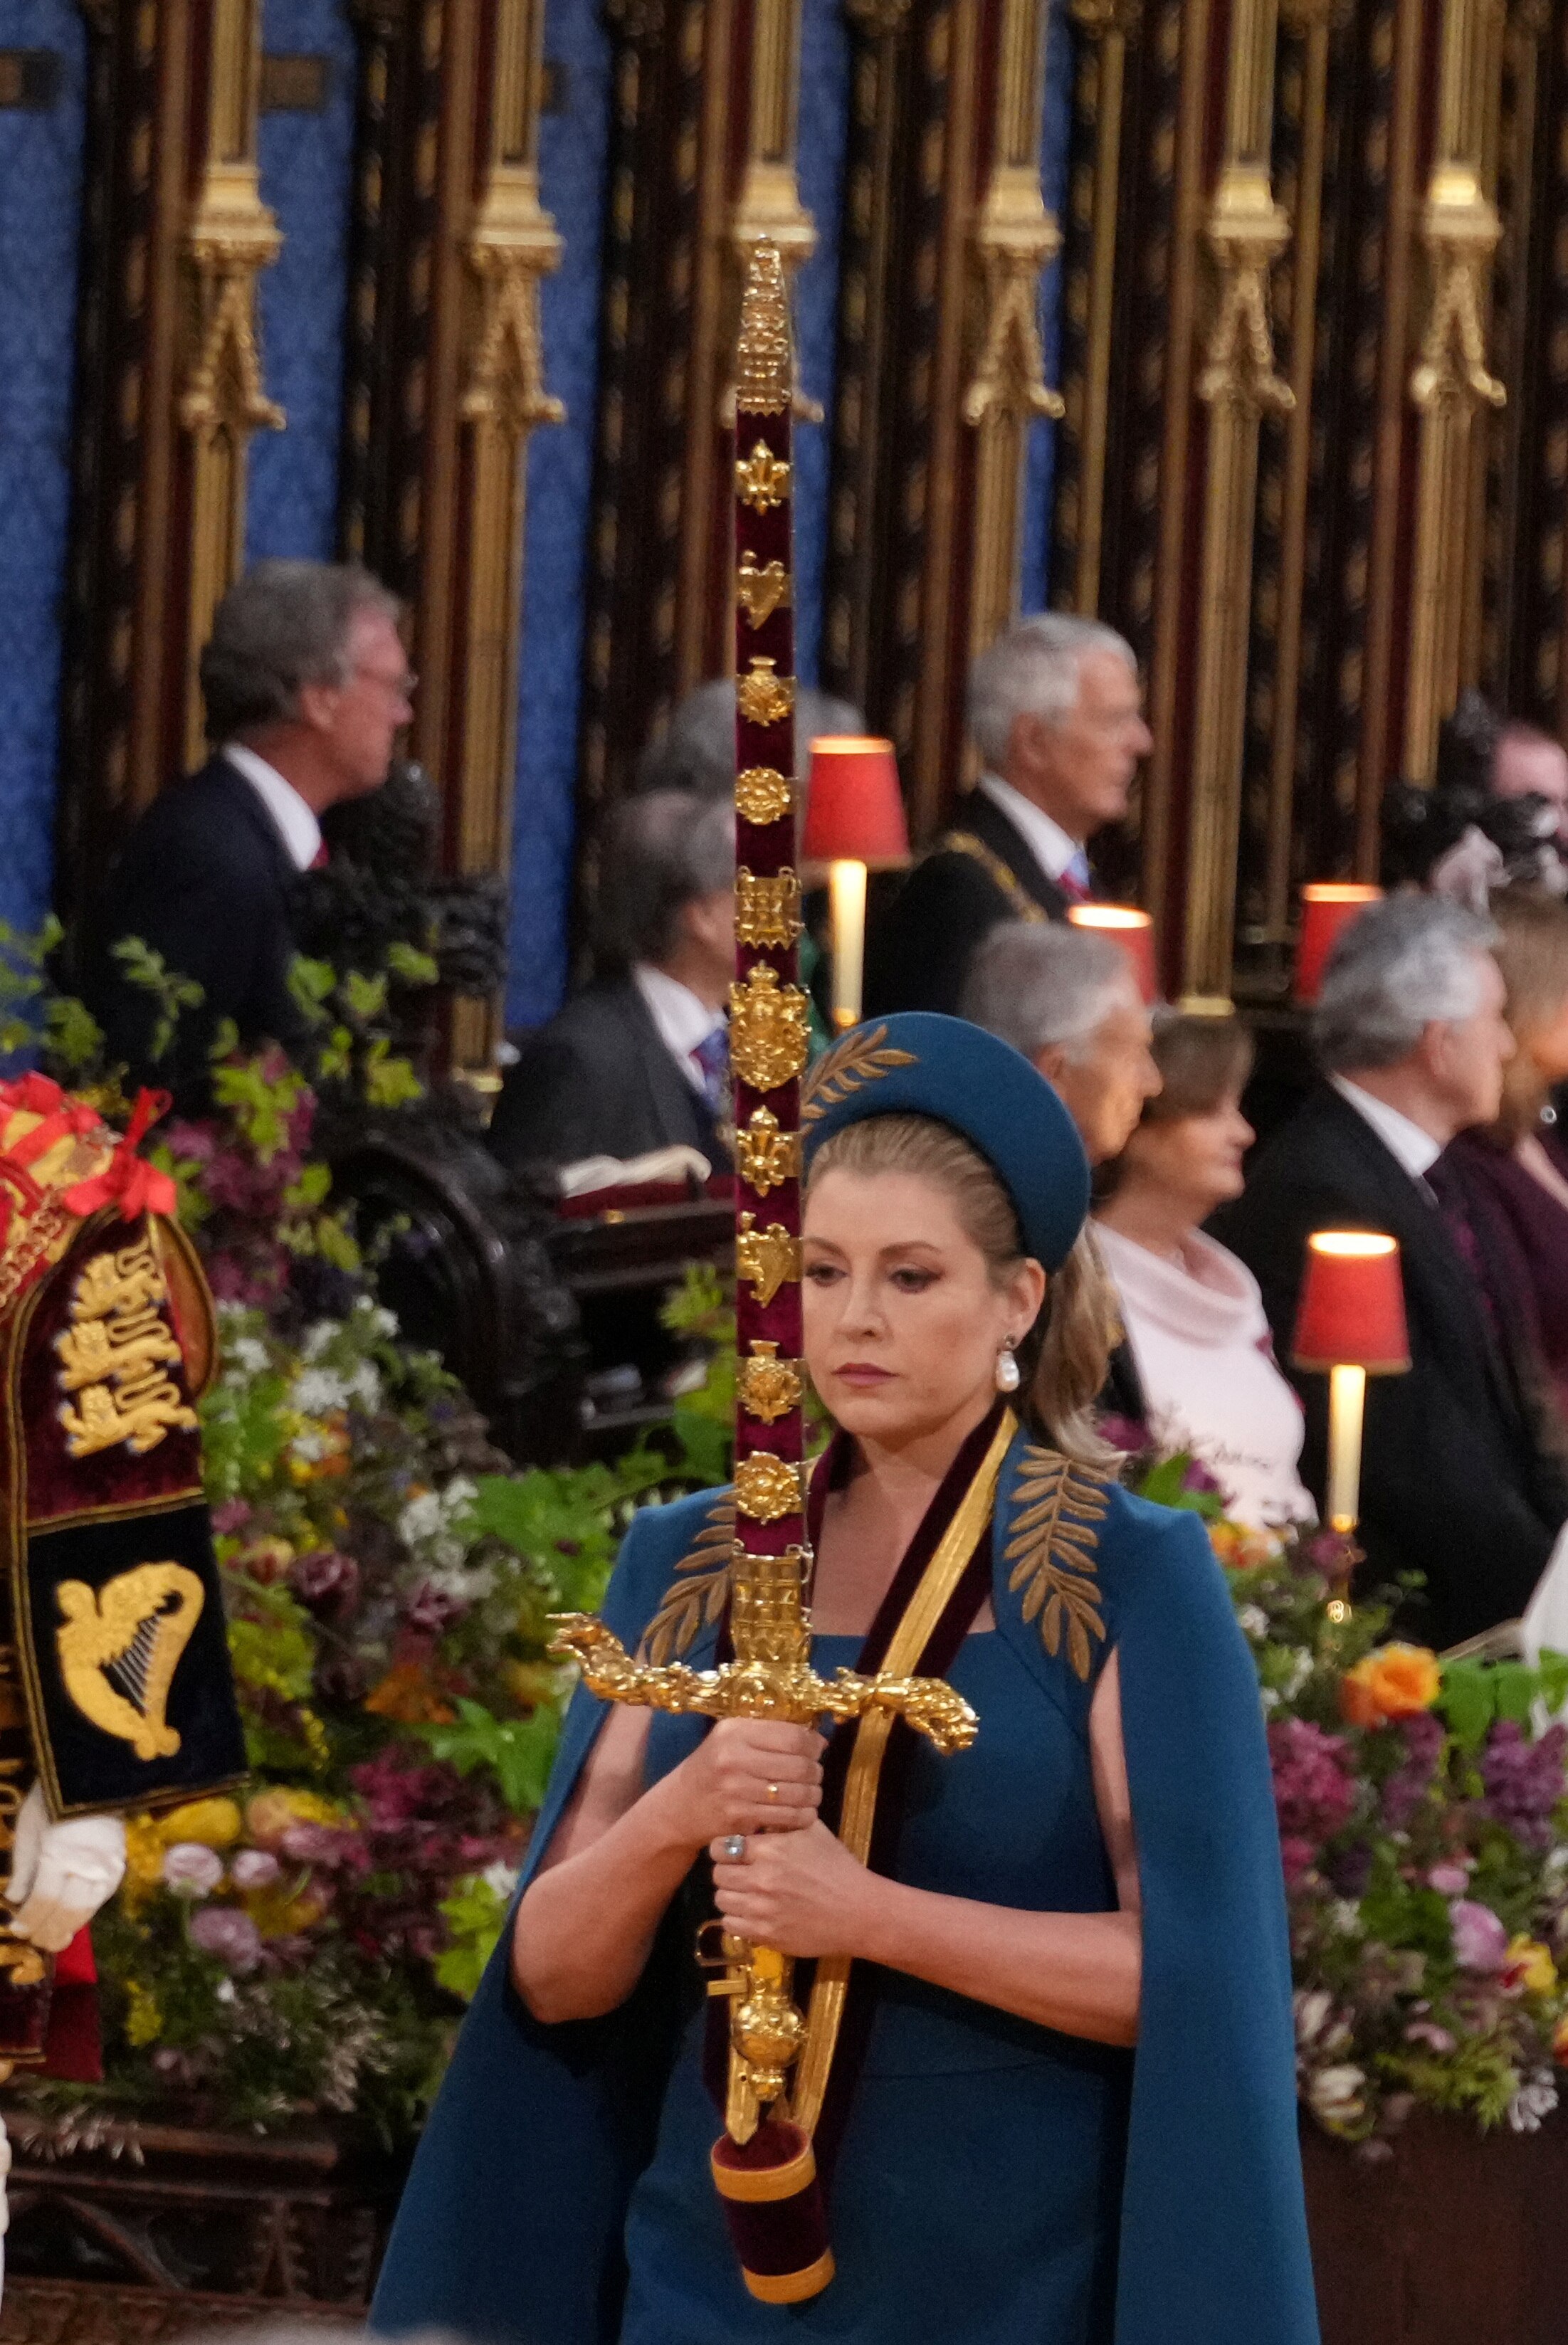 Lord President of the Council, Penny Mordaunt, carrying the Sword of State, in the procession through Westminster Abbey